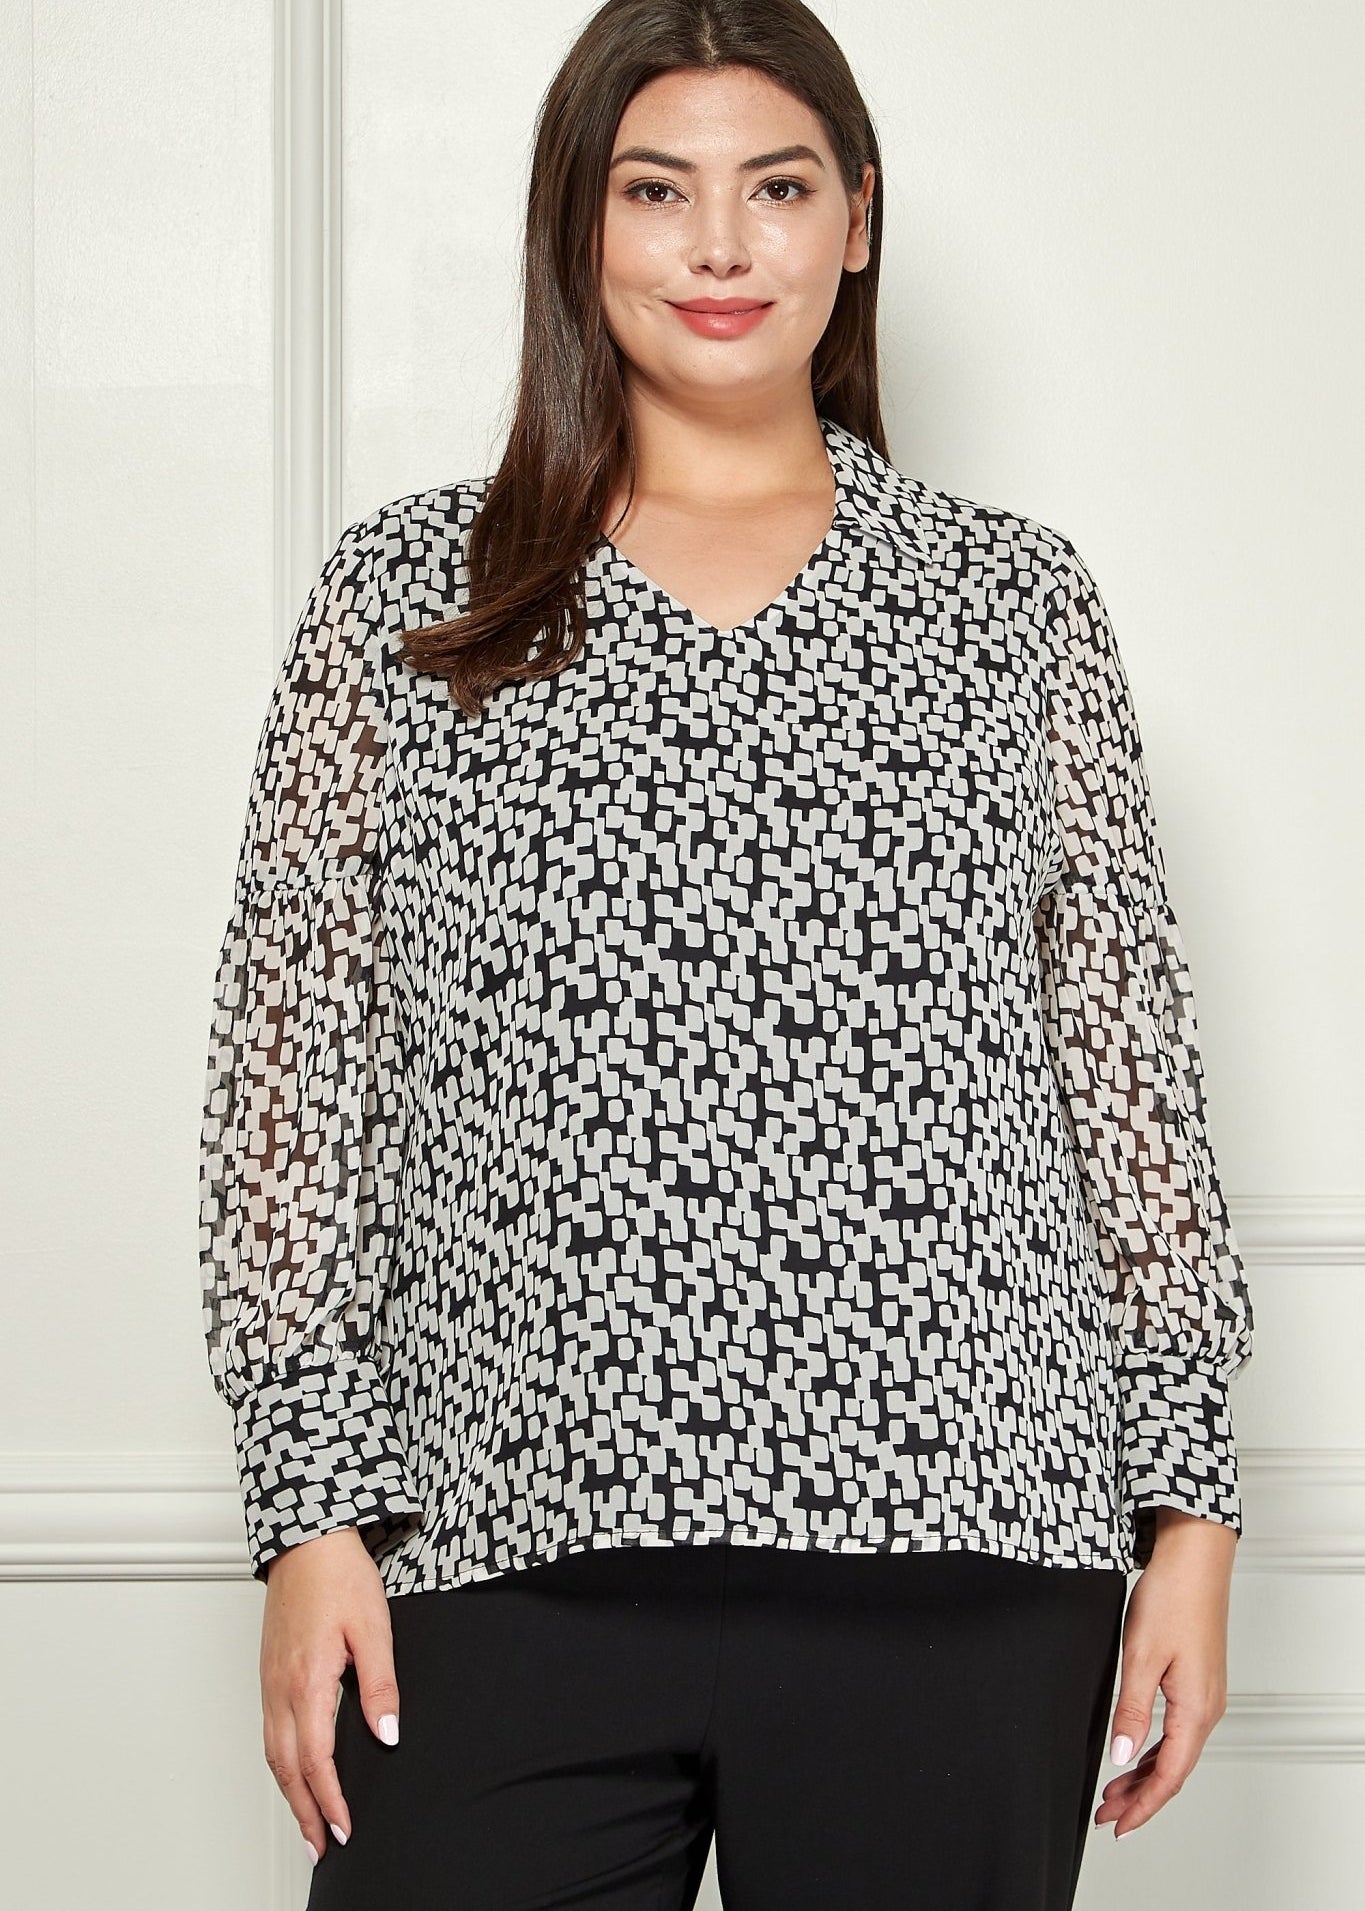 Sara Michelle Long Cuffed Sleeve Shirt Collar Lined Popover Blouse - Plus - DressbarnShirts & Blouses